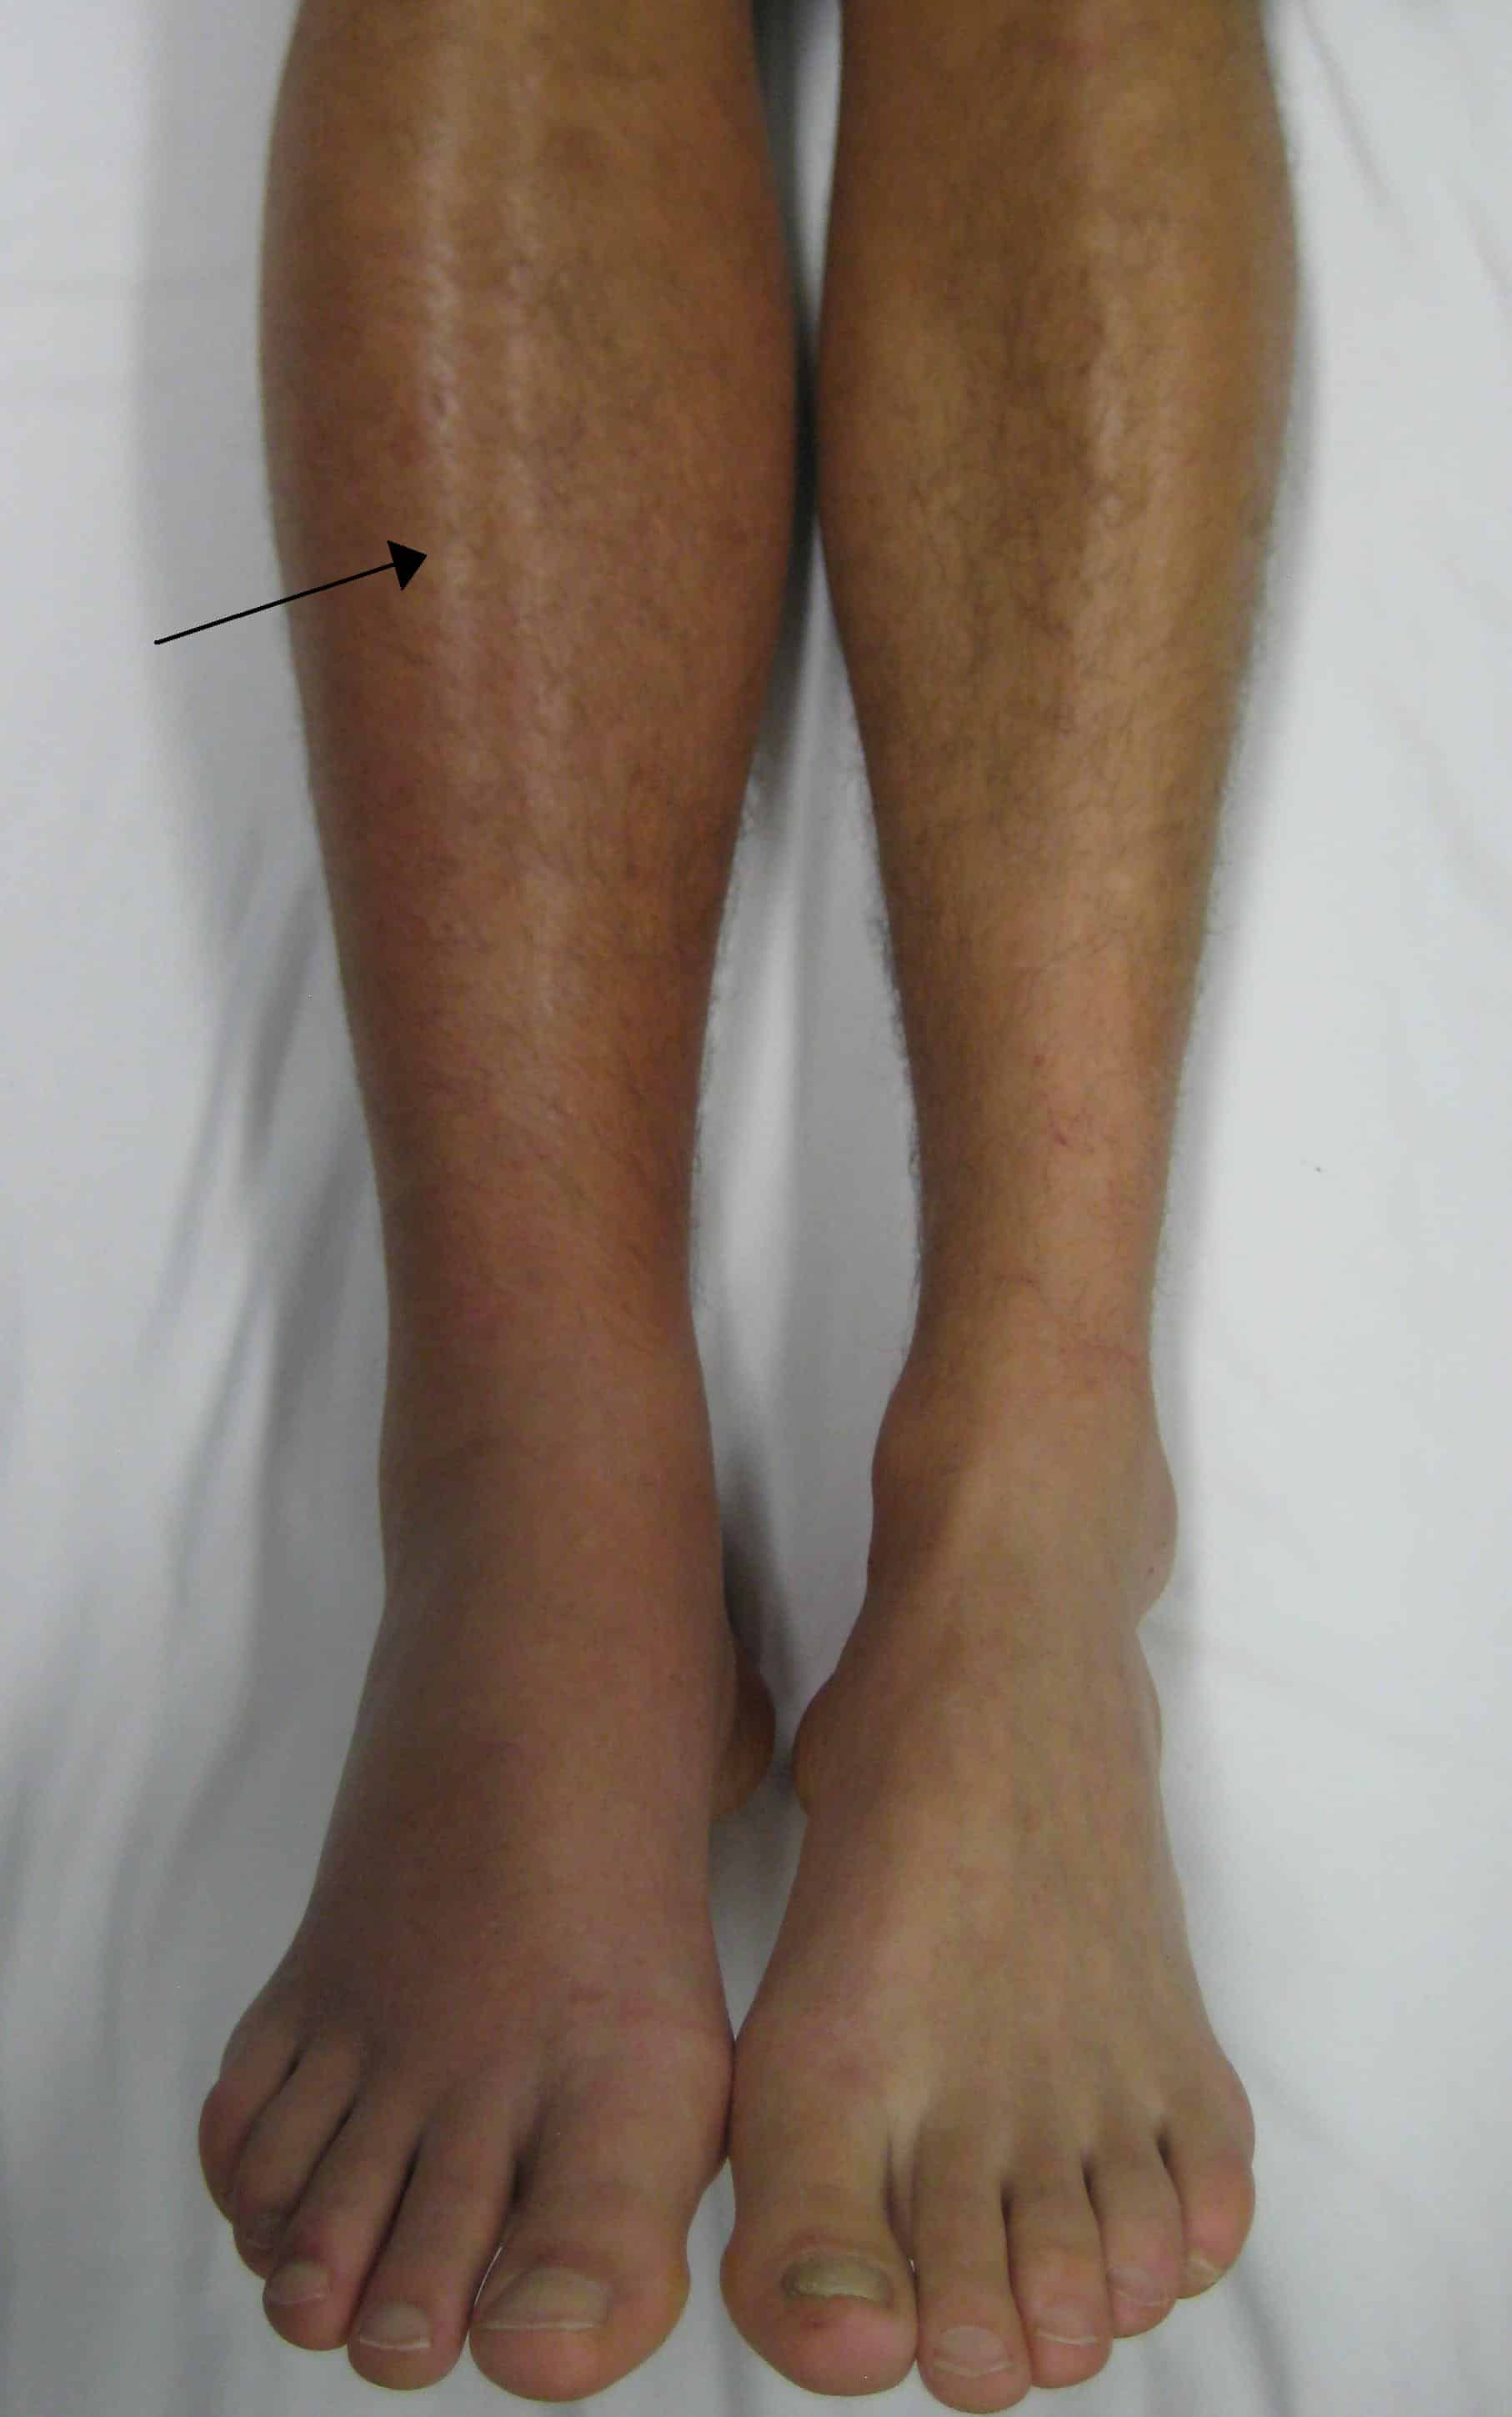 Fig 2 - Deep vein thrombosis in the right leg. The leg is swollen and red.